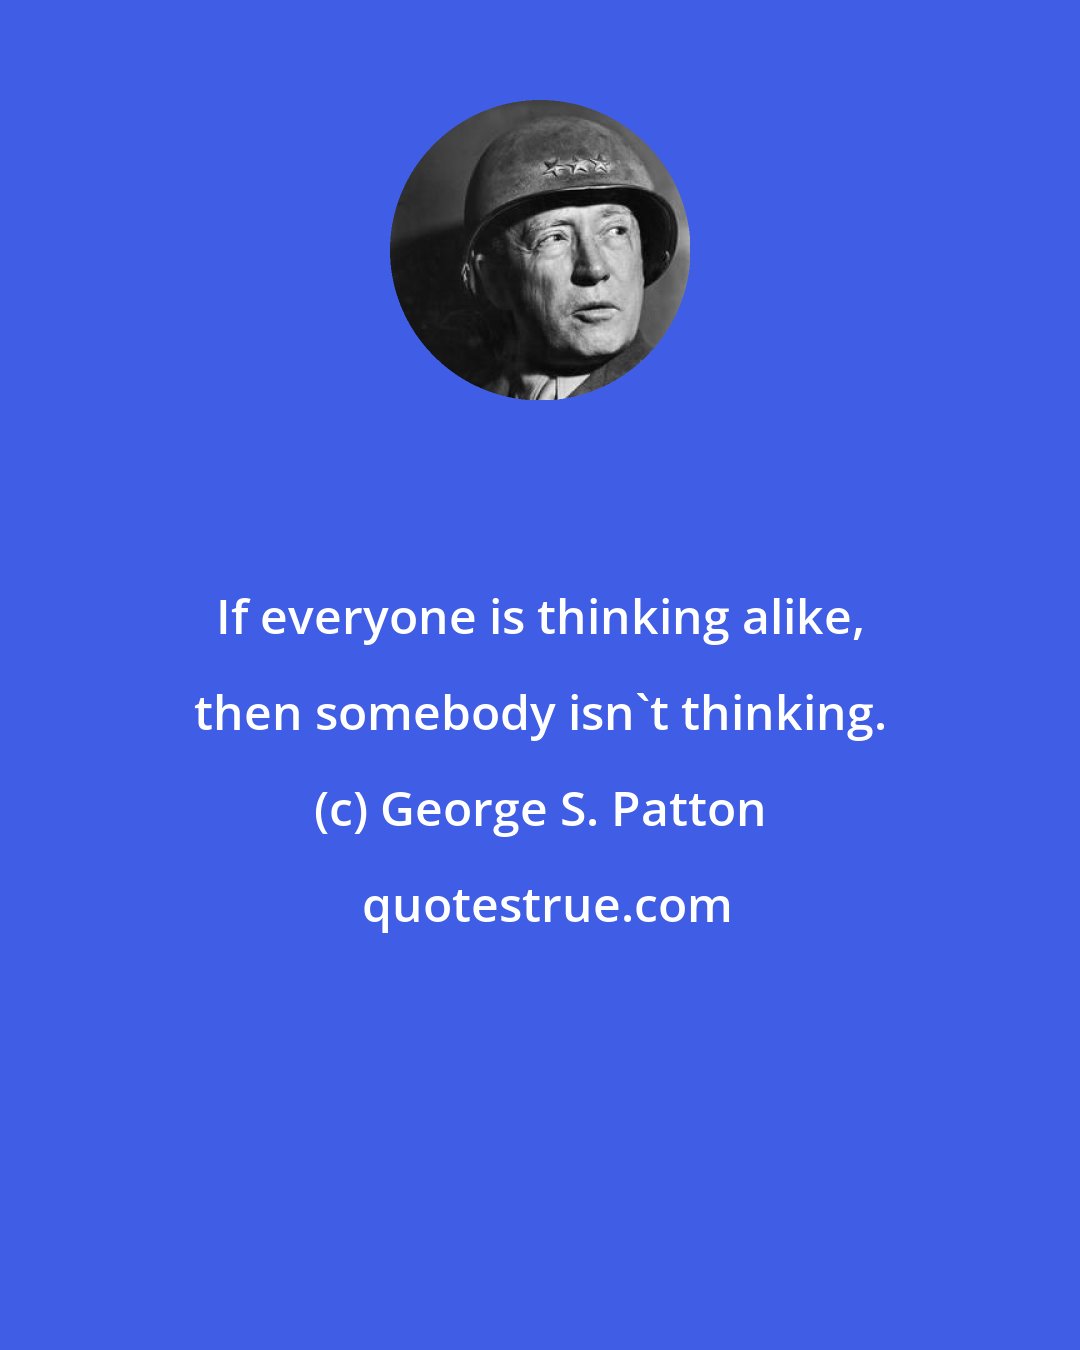 George S. Patton: If everyone is thinking alike, then somebody isn't thinking.